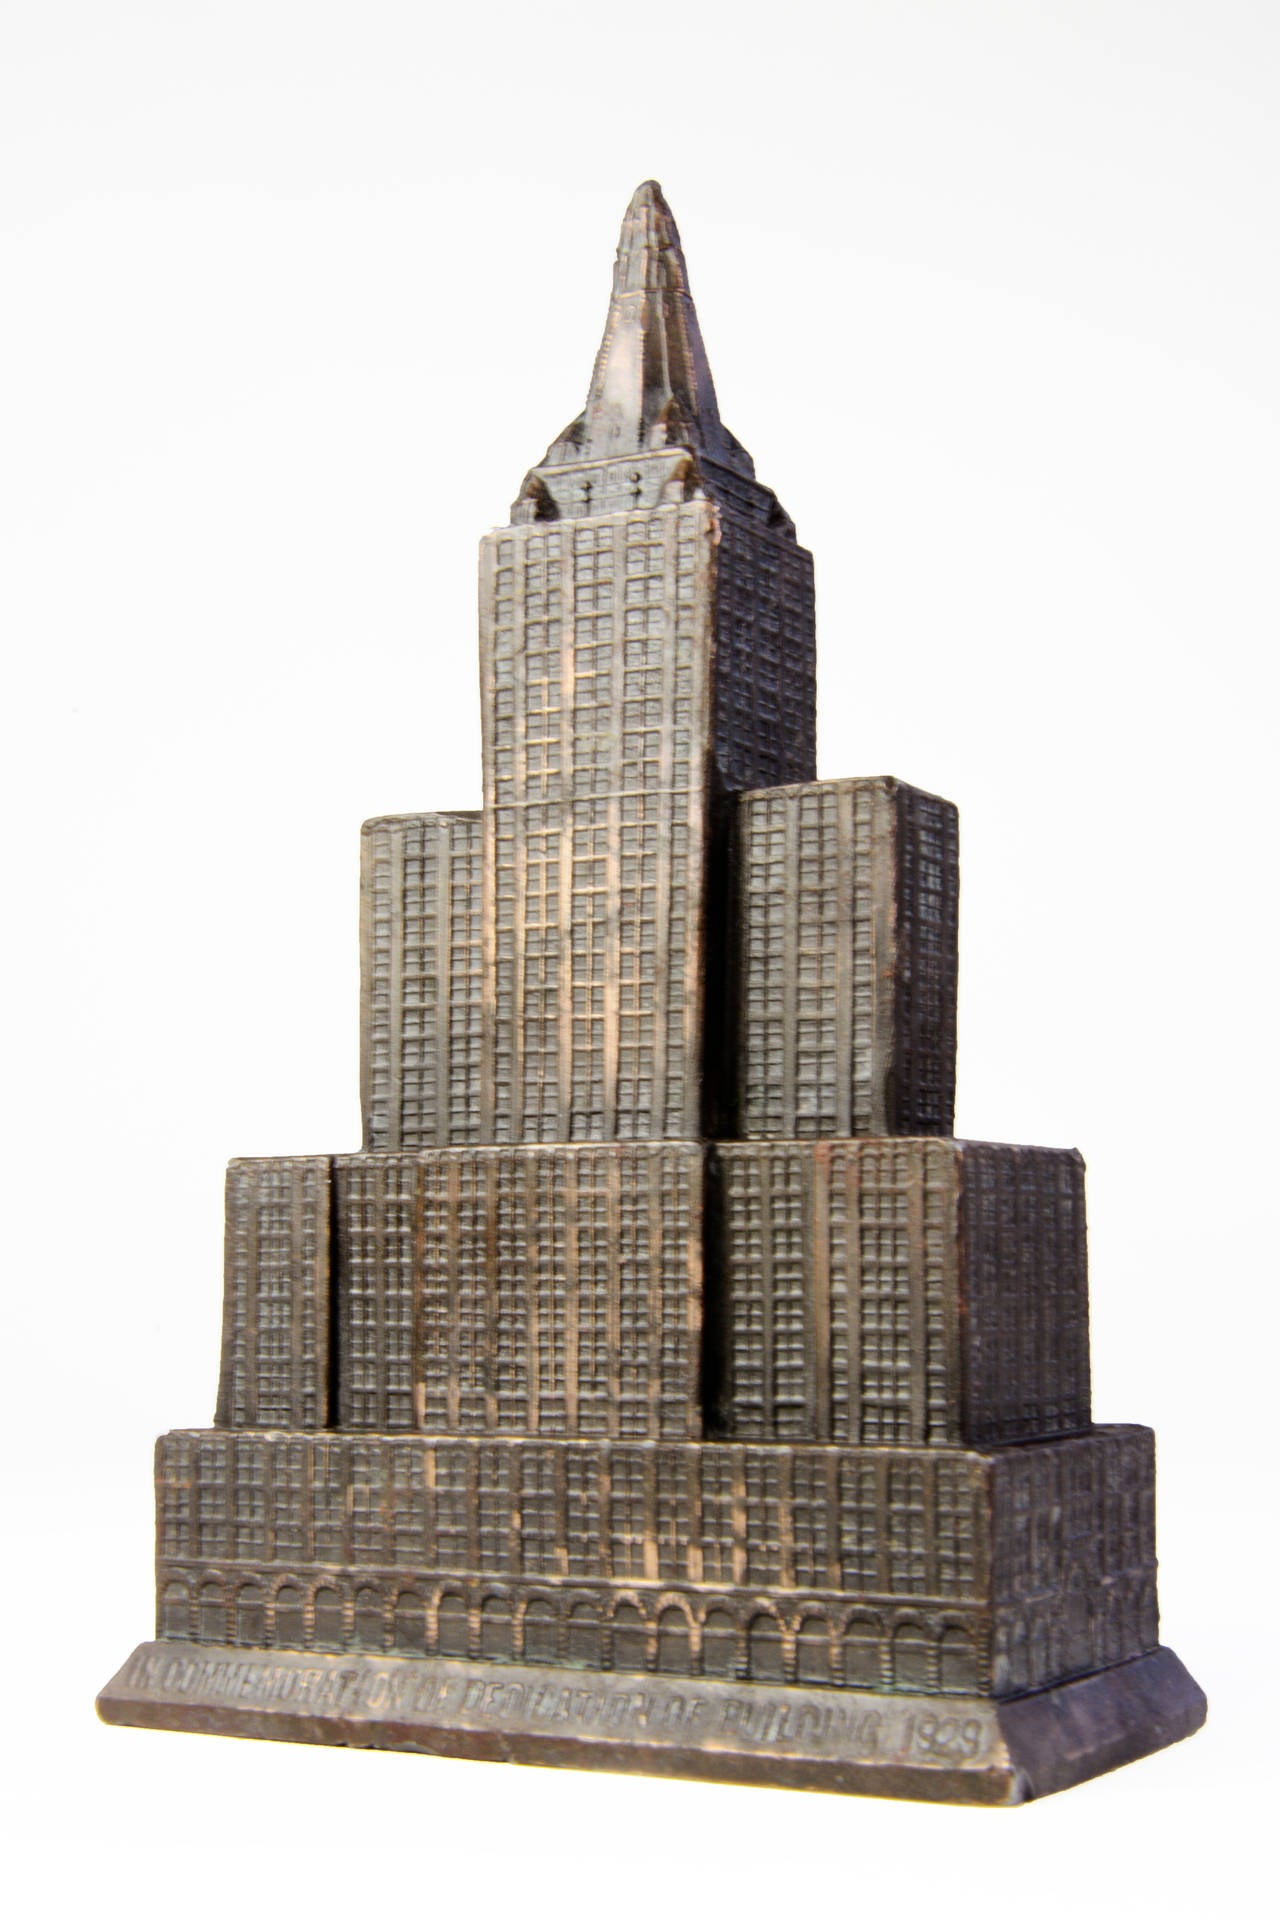 Among the most unusual souvenir building miniatures are those made to commemorate the opening of a new structure. Cast into the base of this well-detailed, copper-plated lead replica of the New York Life Insurance skyscraper, located across from